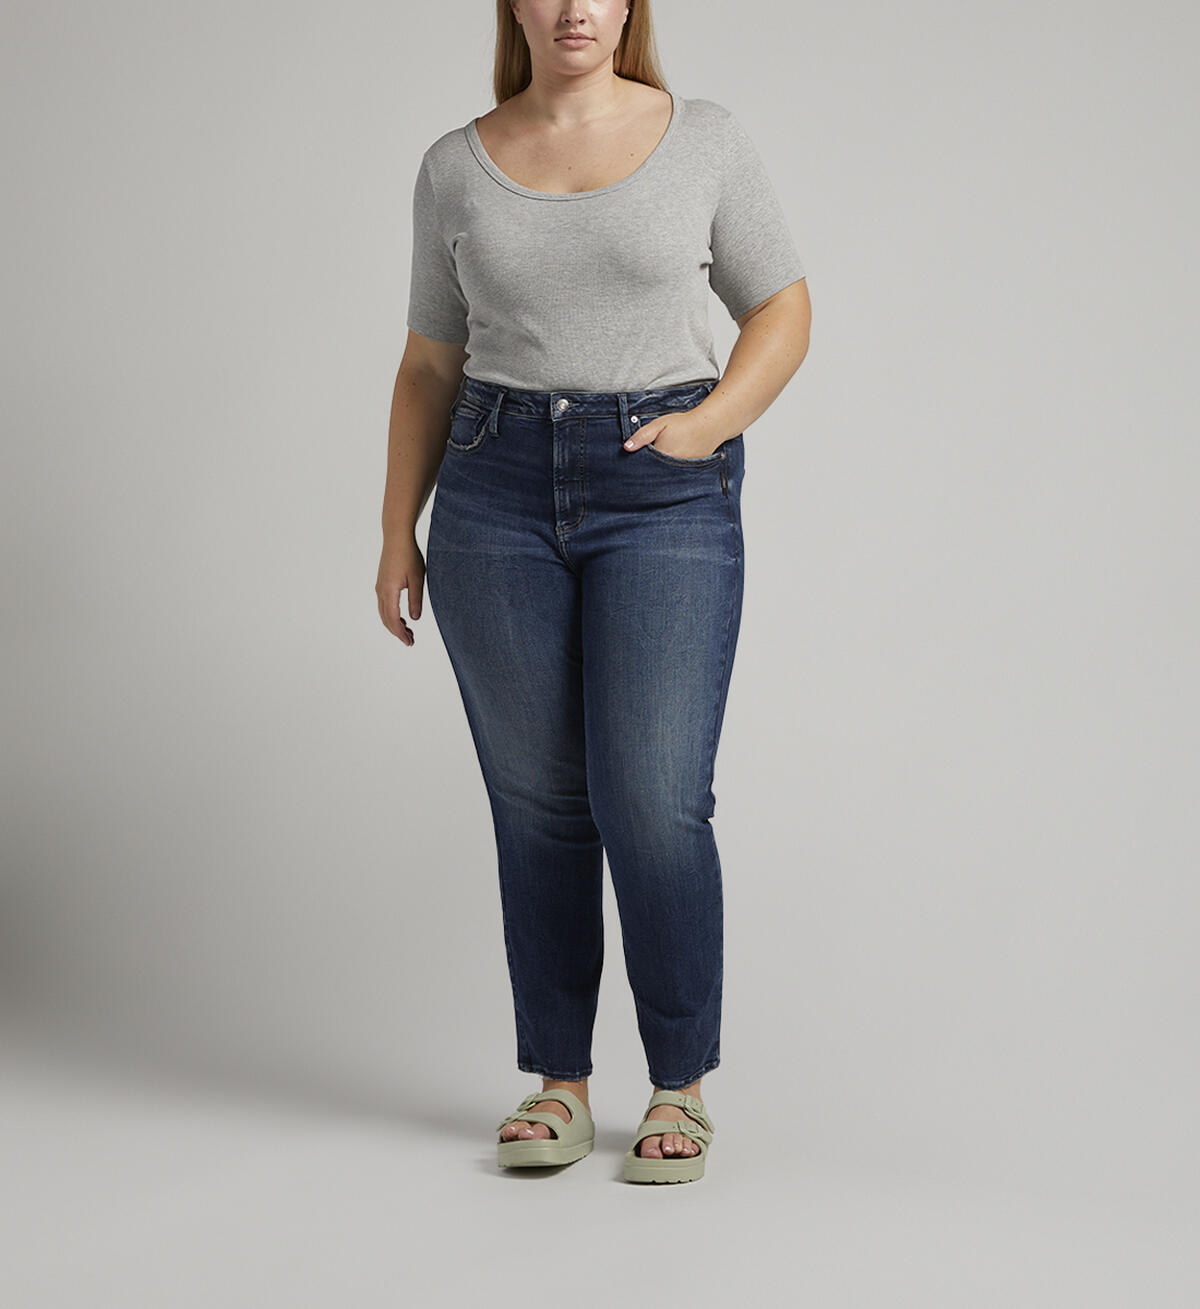 Infinite Fit High Rise Straight Leg Jeans Plus Size, , hi-res image number 0